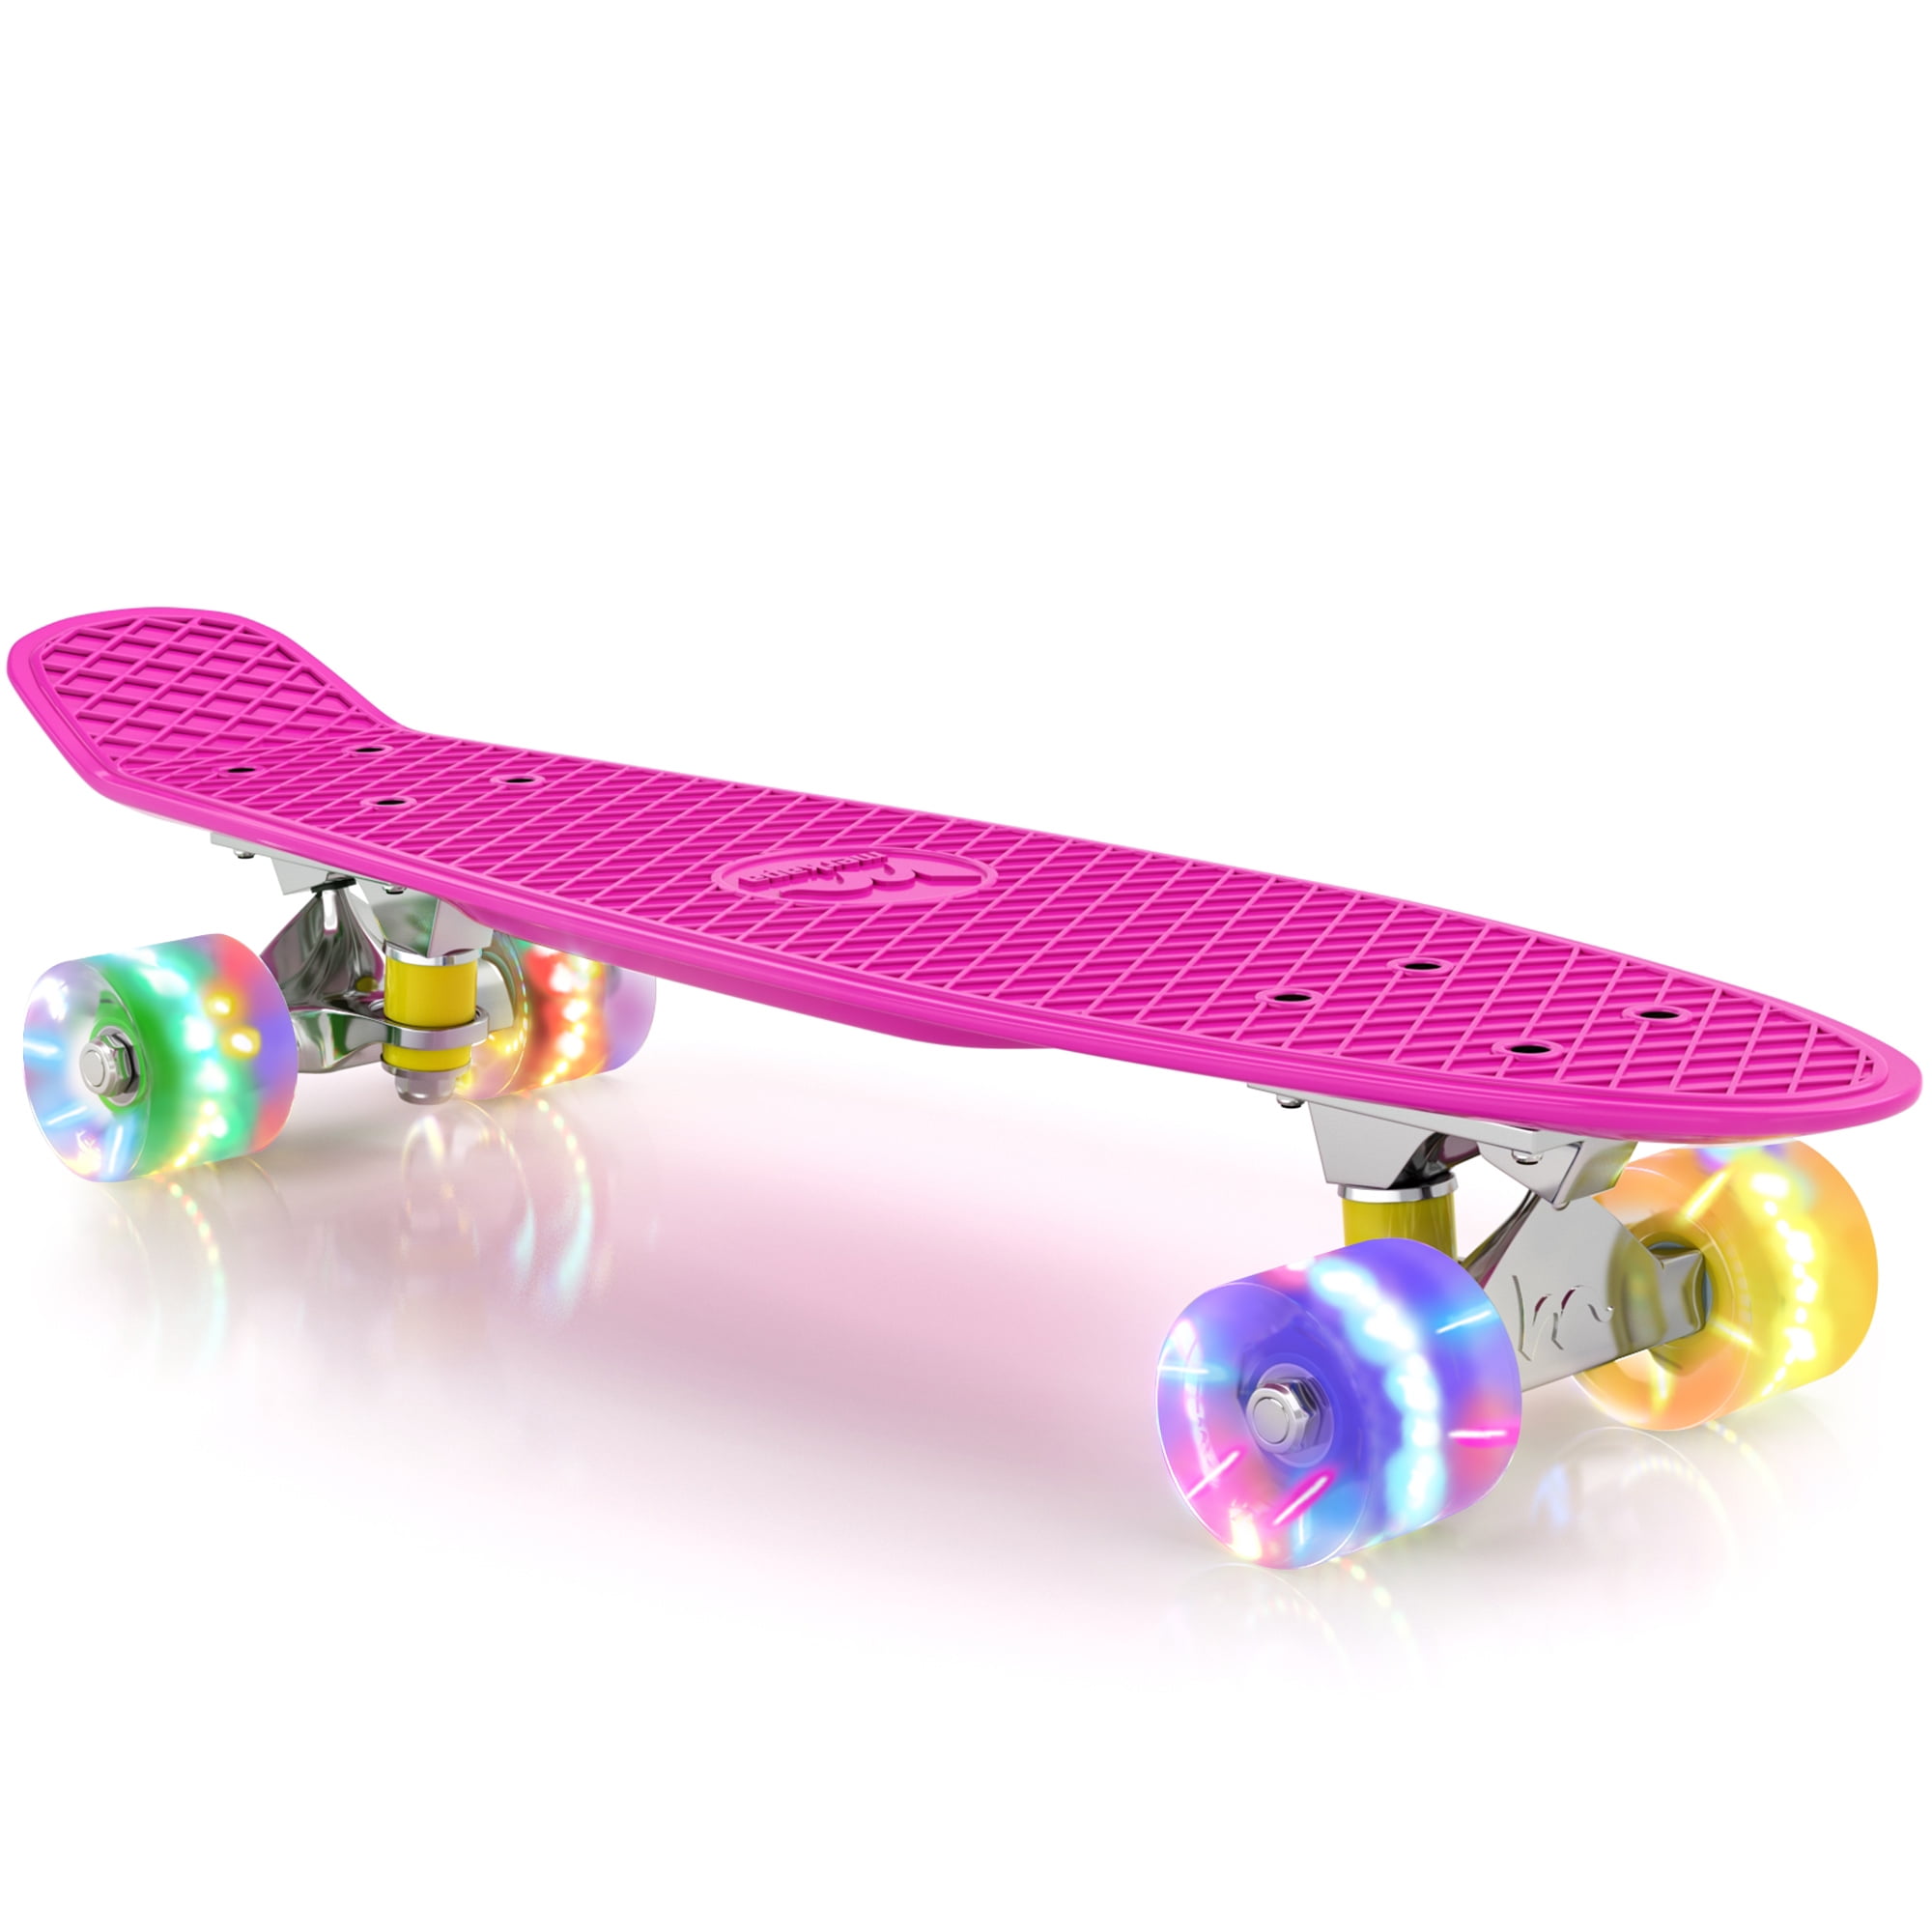 Kids Skateboard Plastic Banana Board with Colorful LED Wheels for School and Travel Complete 22 24 Cruiser Skateboard for Beginners 